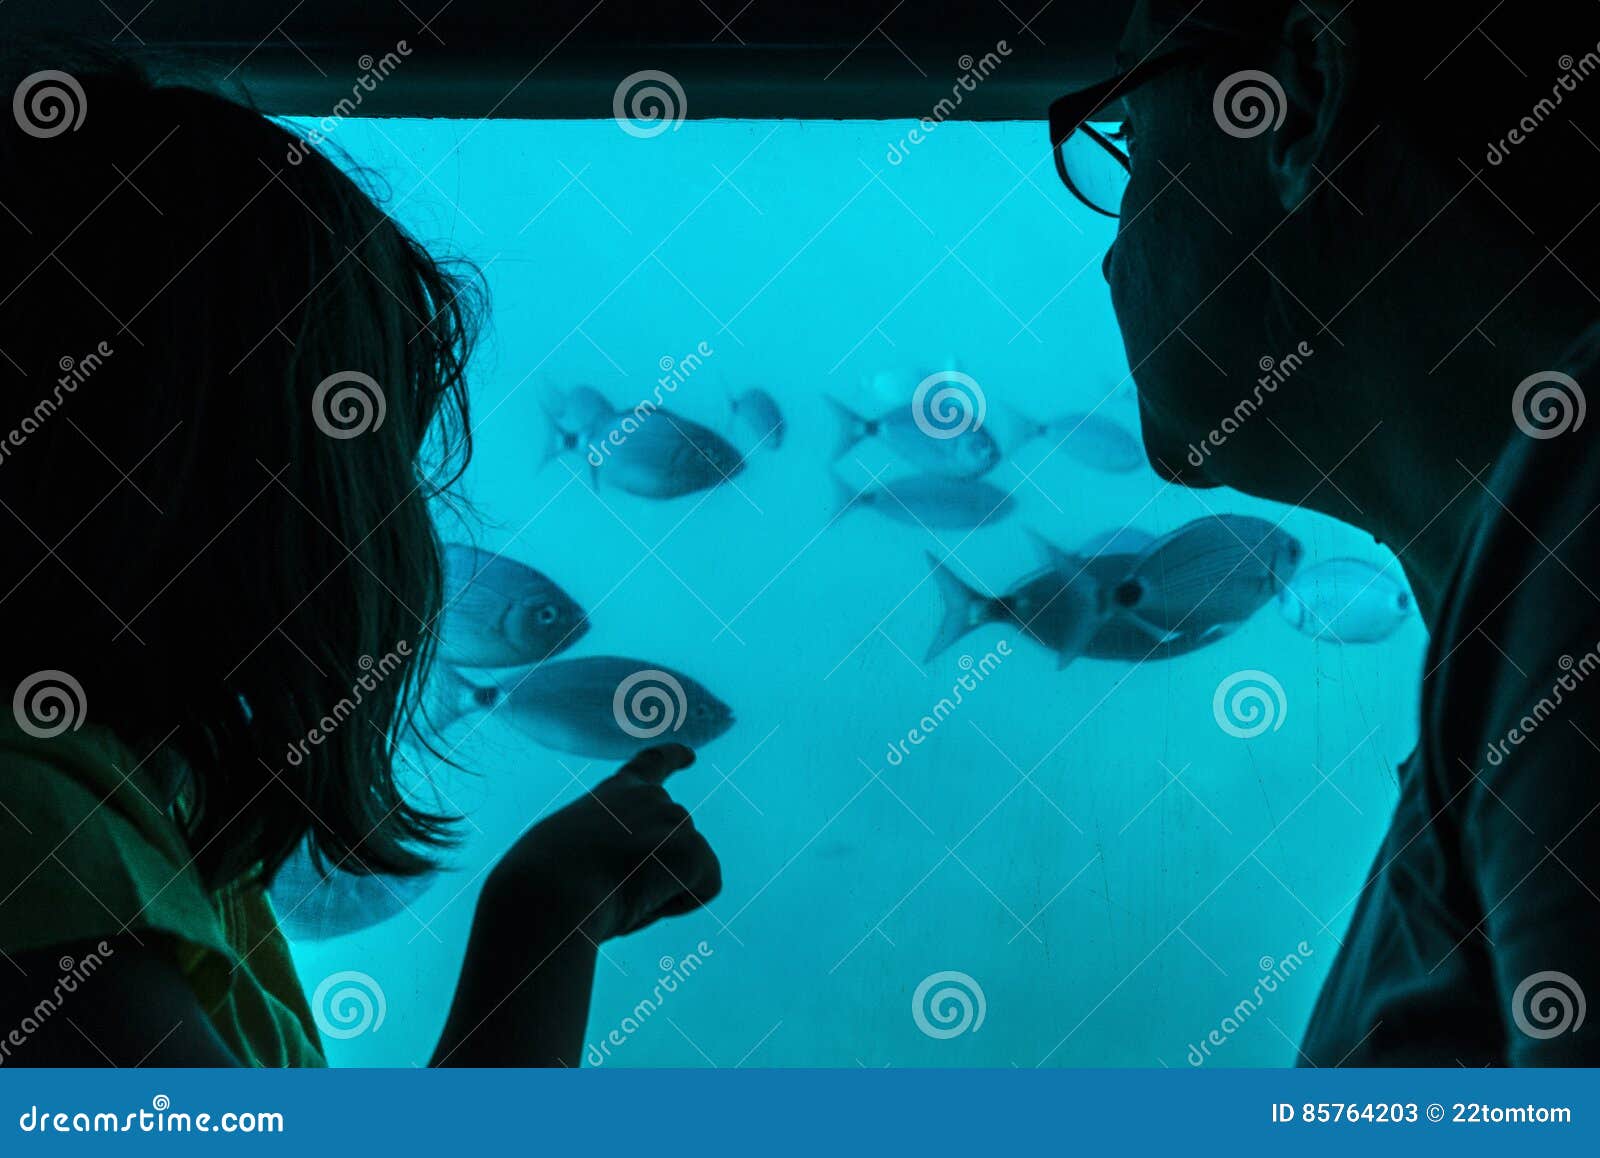 mother and daughter looking at fish through a glass in a boat